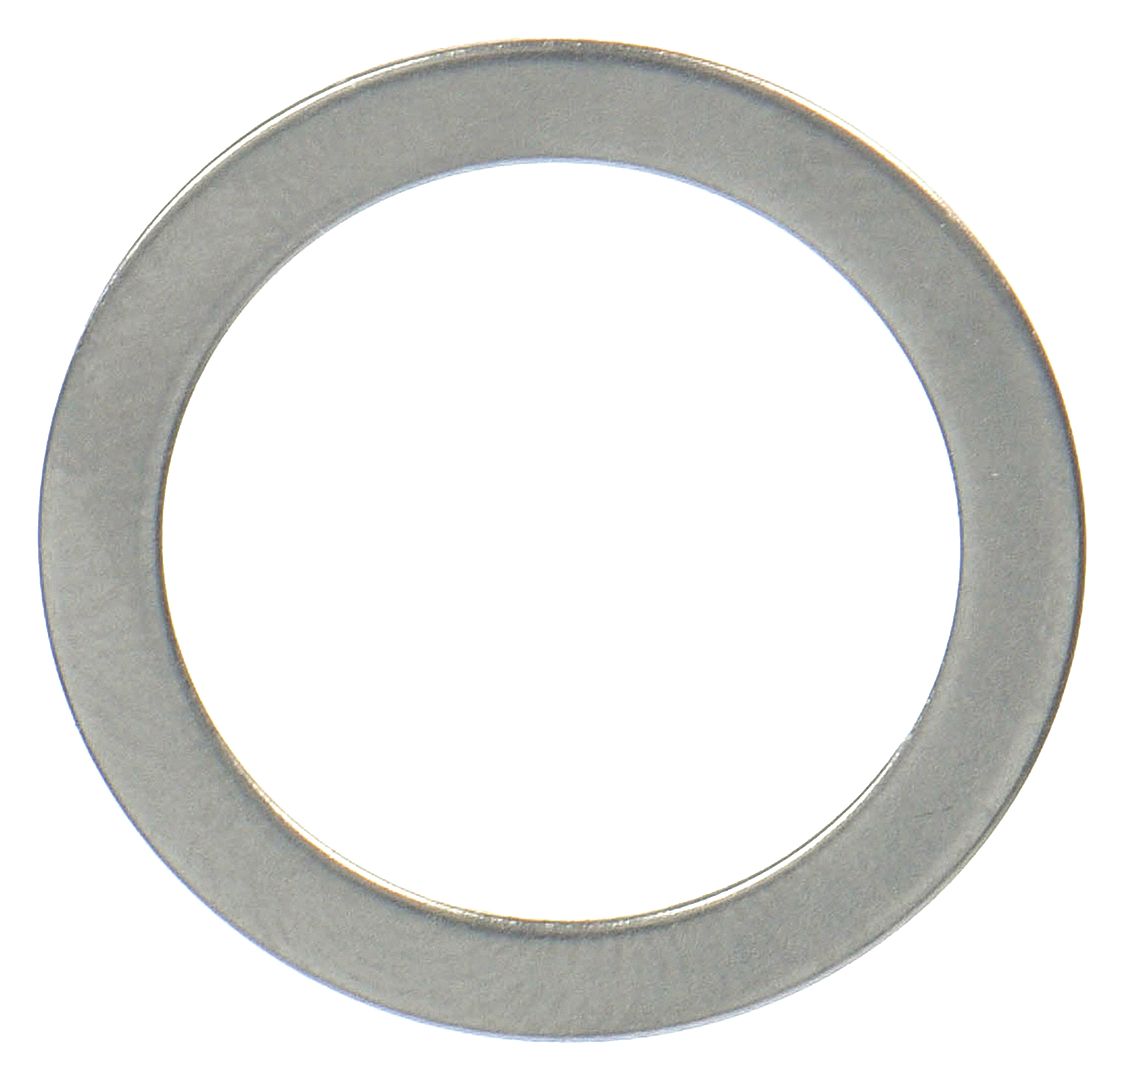 Full Hard Temper 1-1/2 OD Steel Round Shim Pack of 10 0.004 Thickness 1 ID Matte Finish 